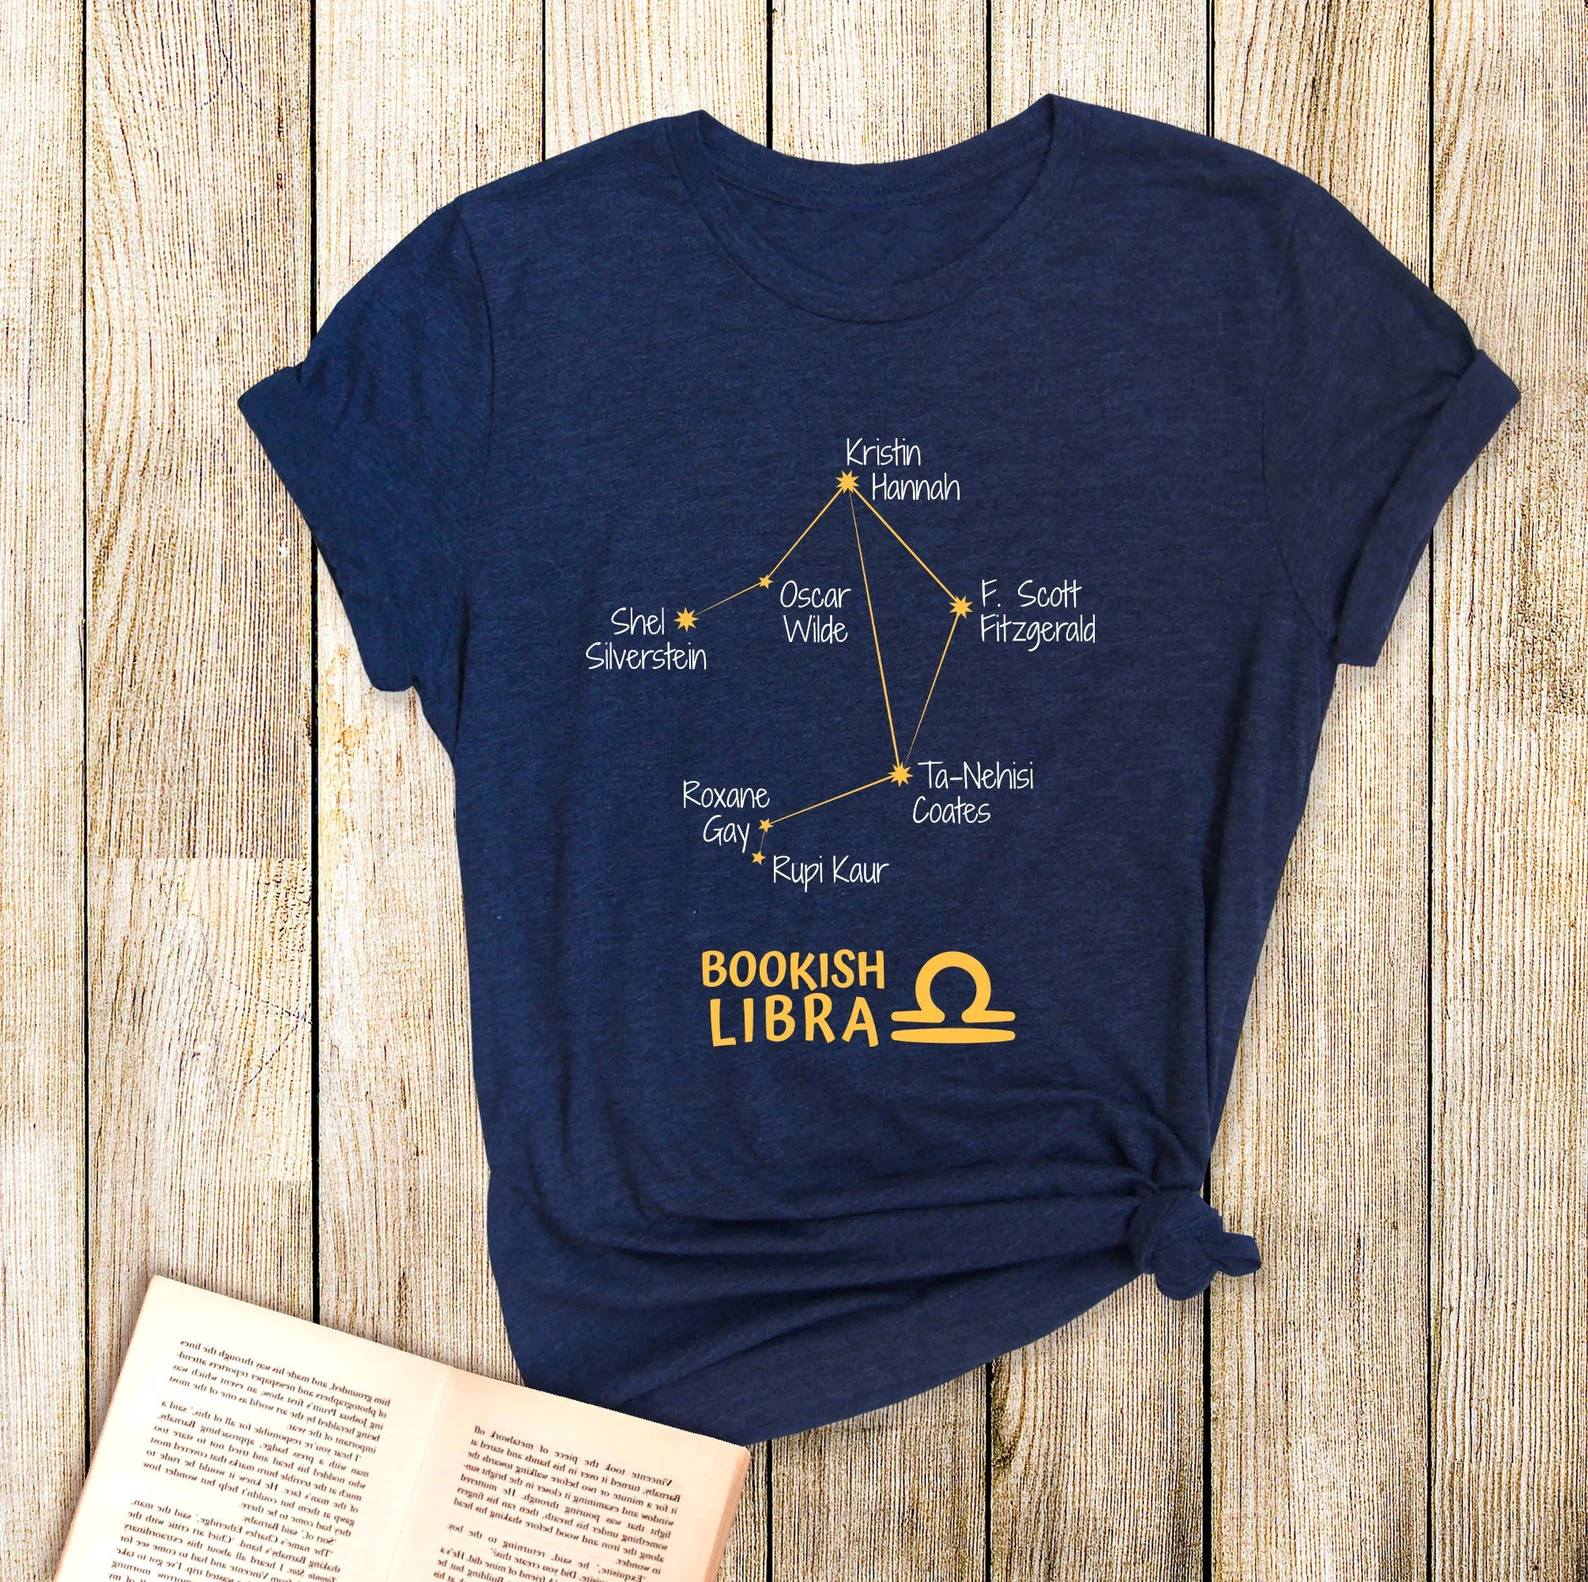 A dark blue t-shirt with the libra zodiac constellation. It features the names of famous libra authors.